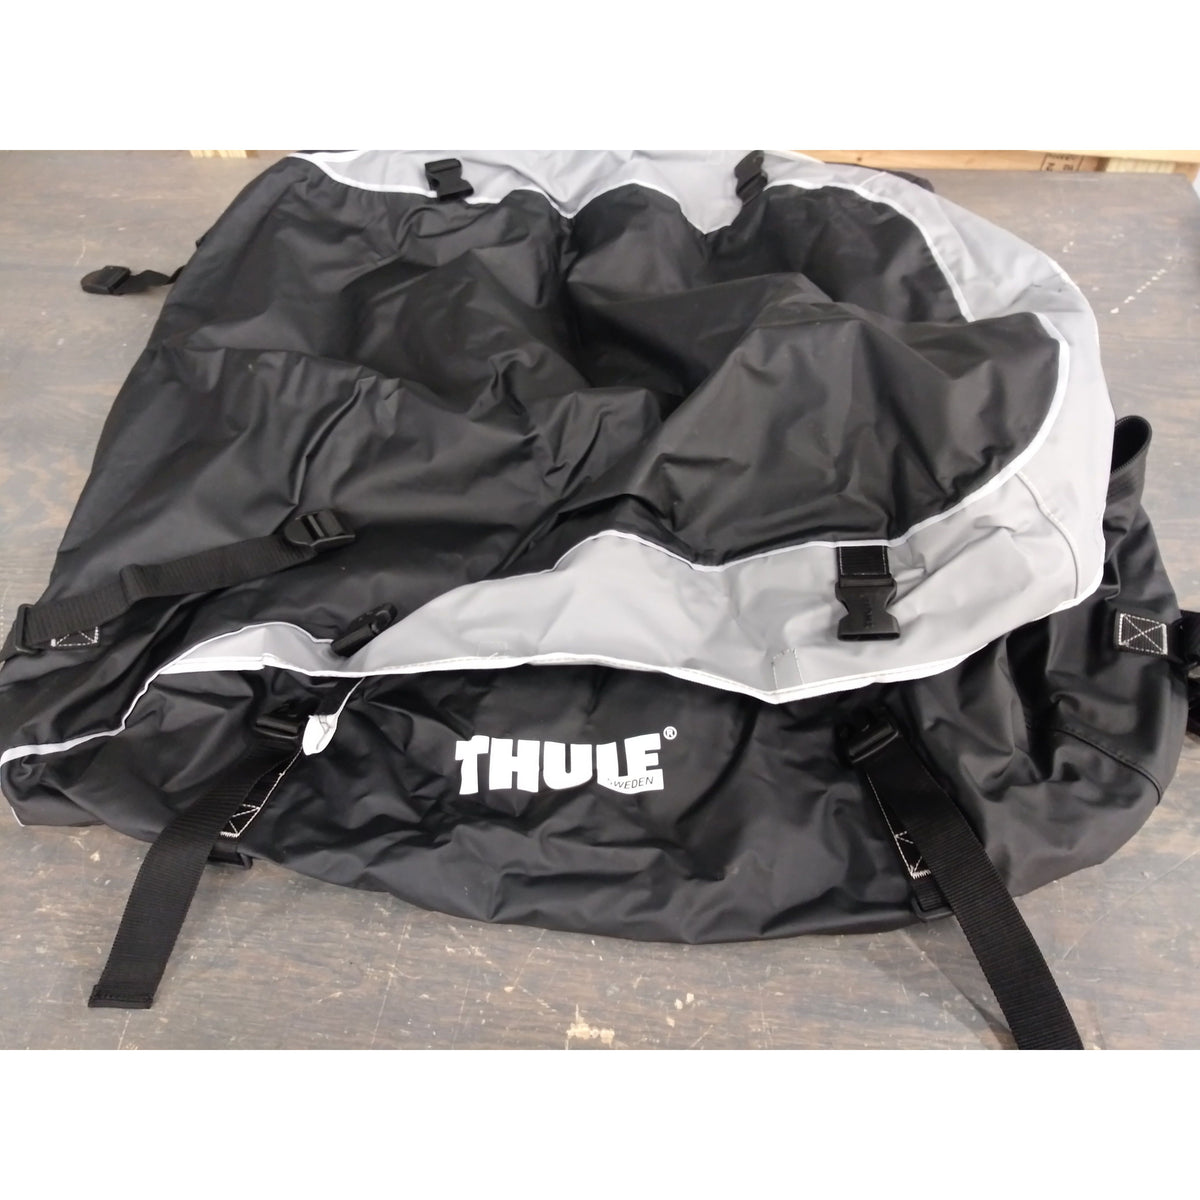 Thule Interstate Rooftop Cargo Carrier - Used - Acceptable